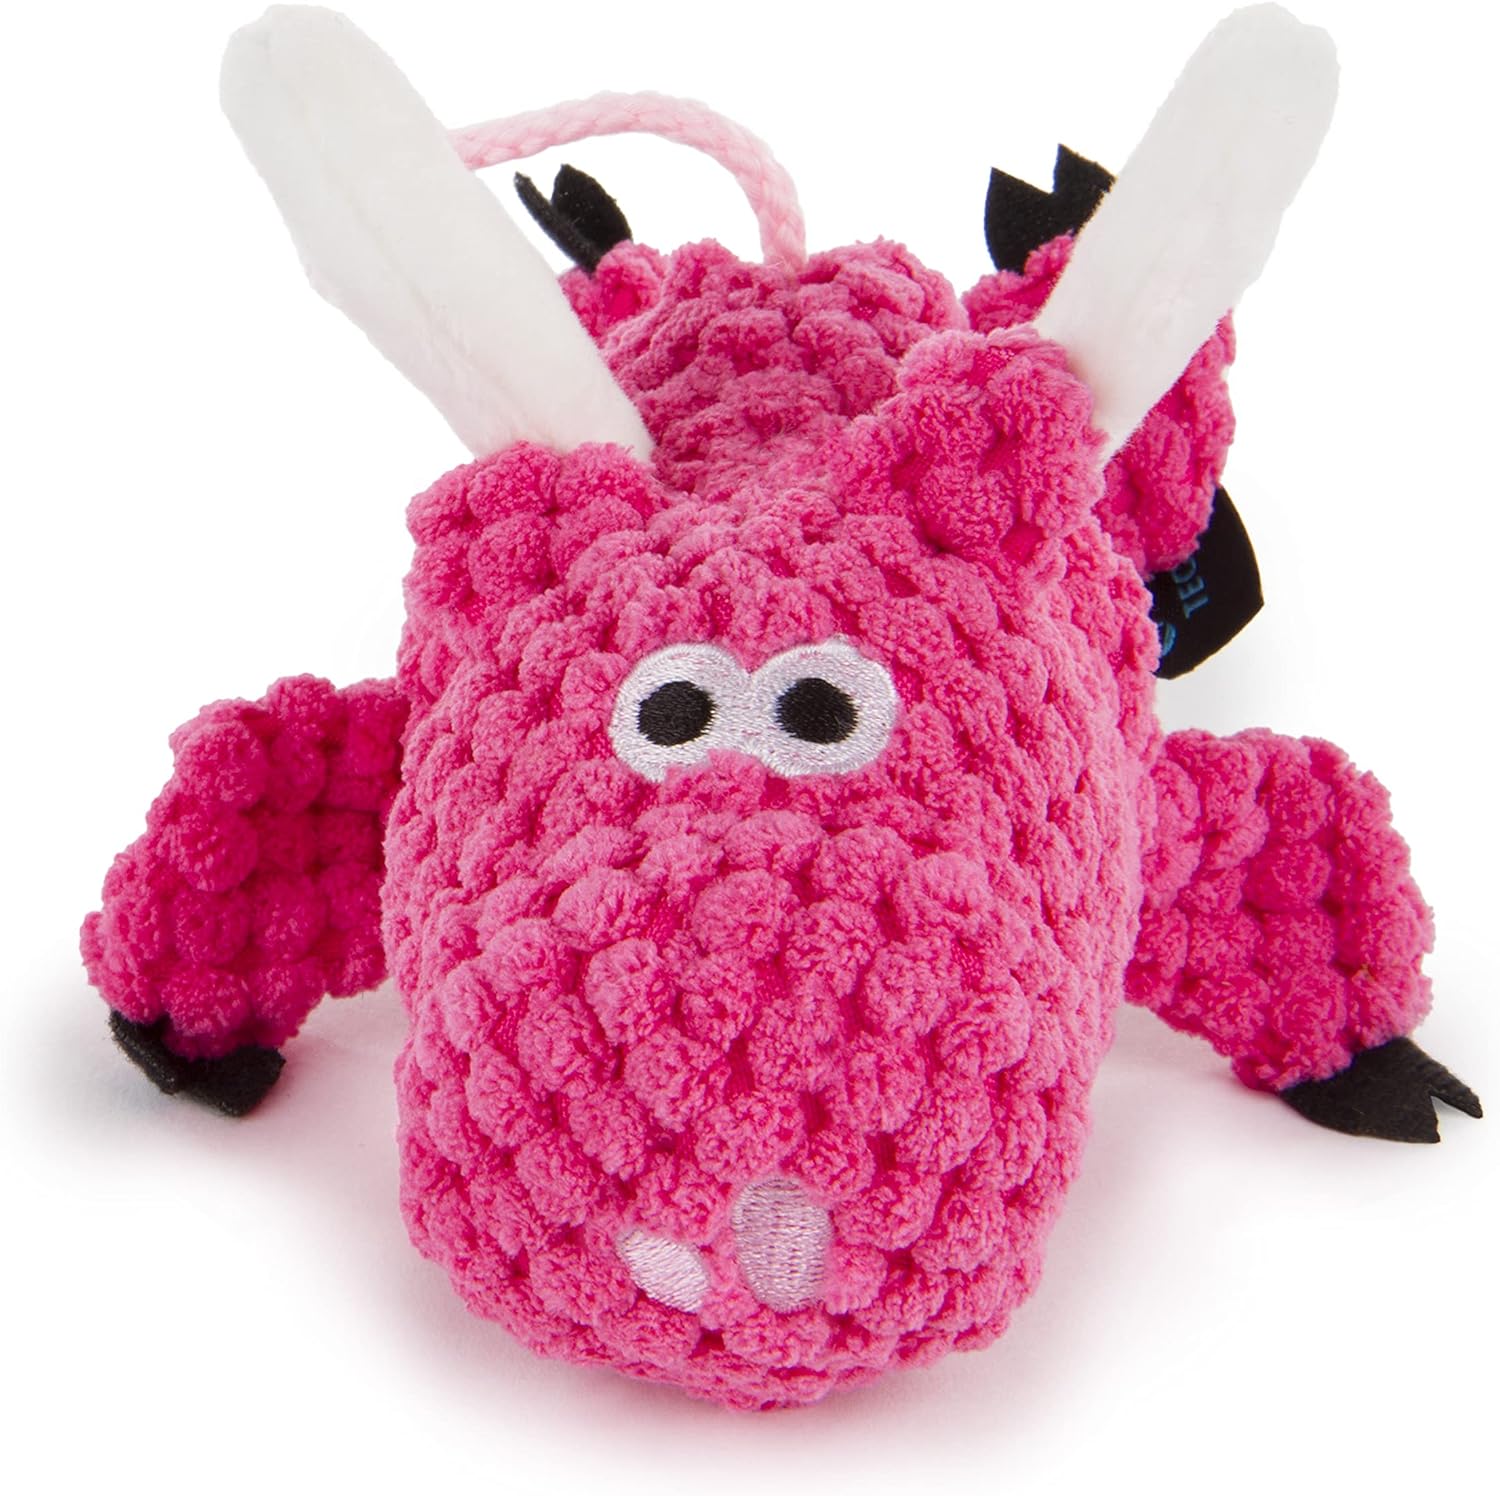 goDog Checkers Just for Me Flying Pig Squeaky Plush Dog Toy - Pink